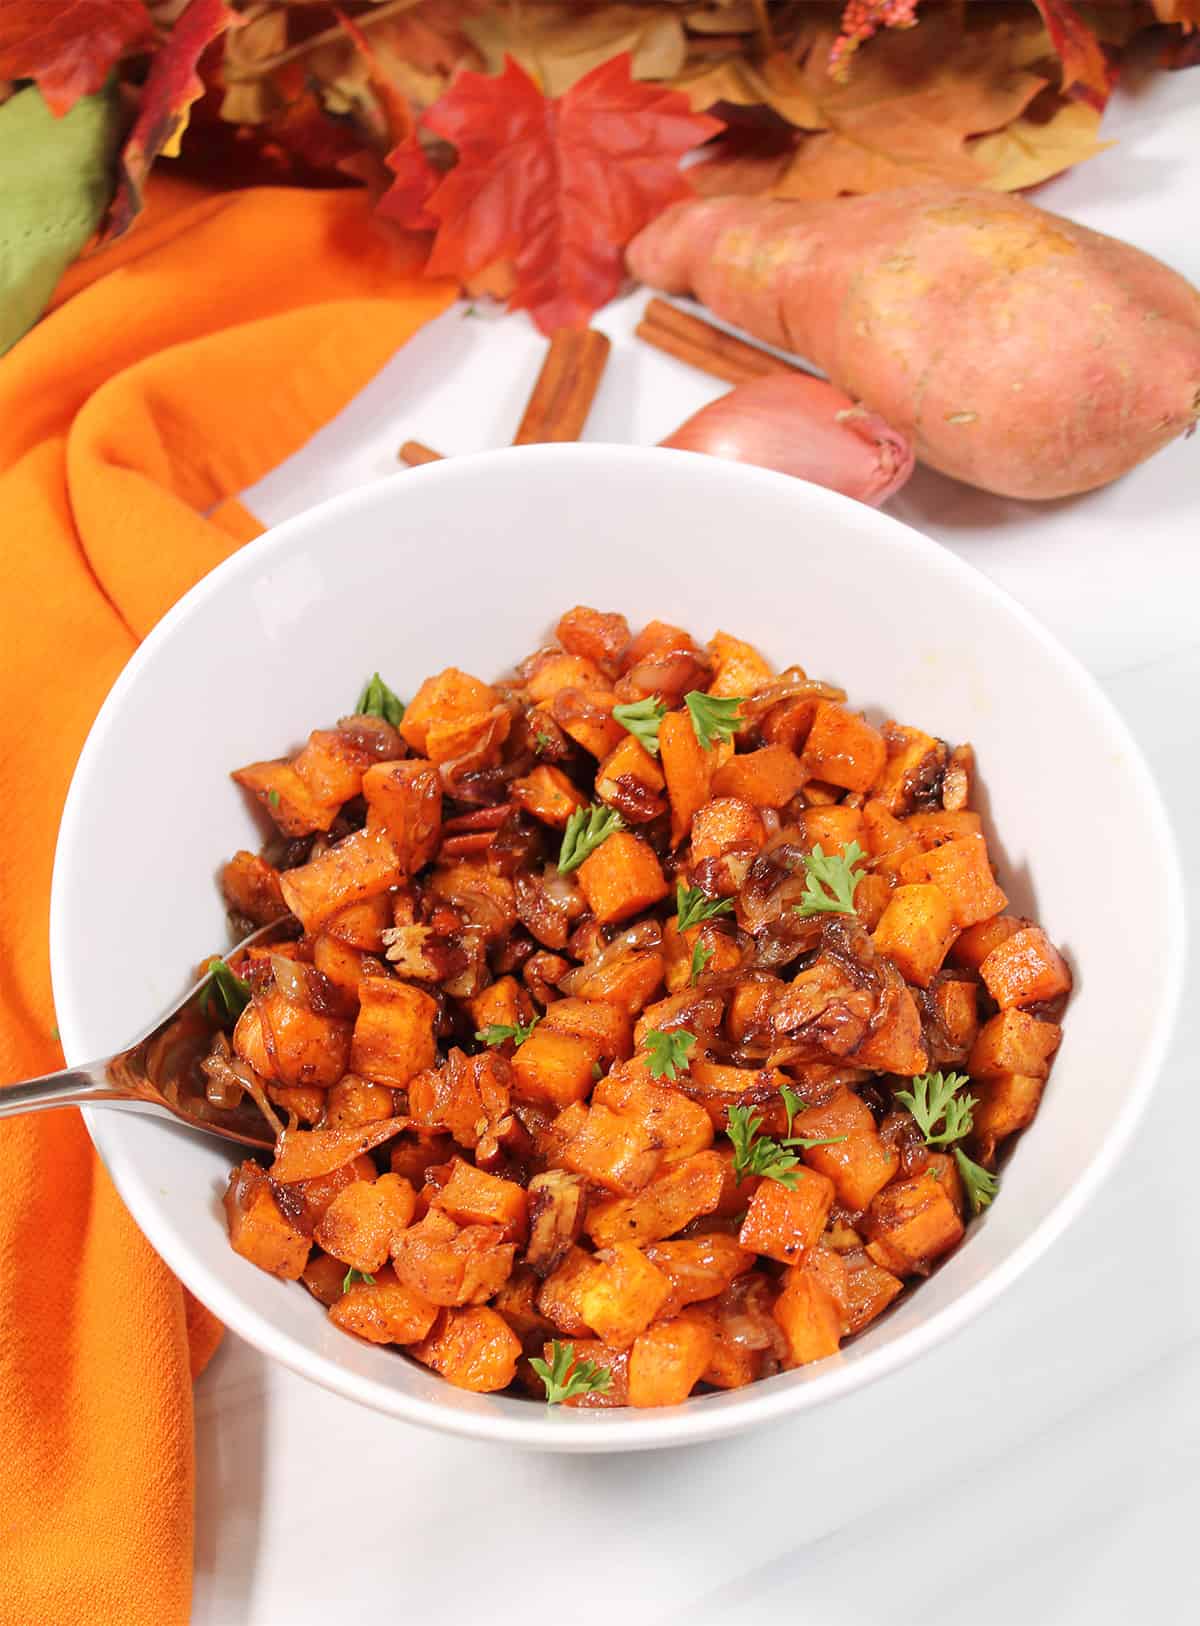 Roasted sweet potatoes in bowl with parsley garnish.